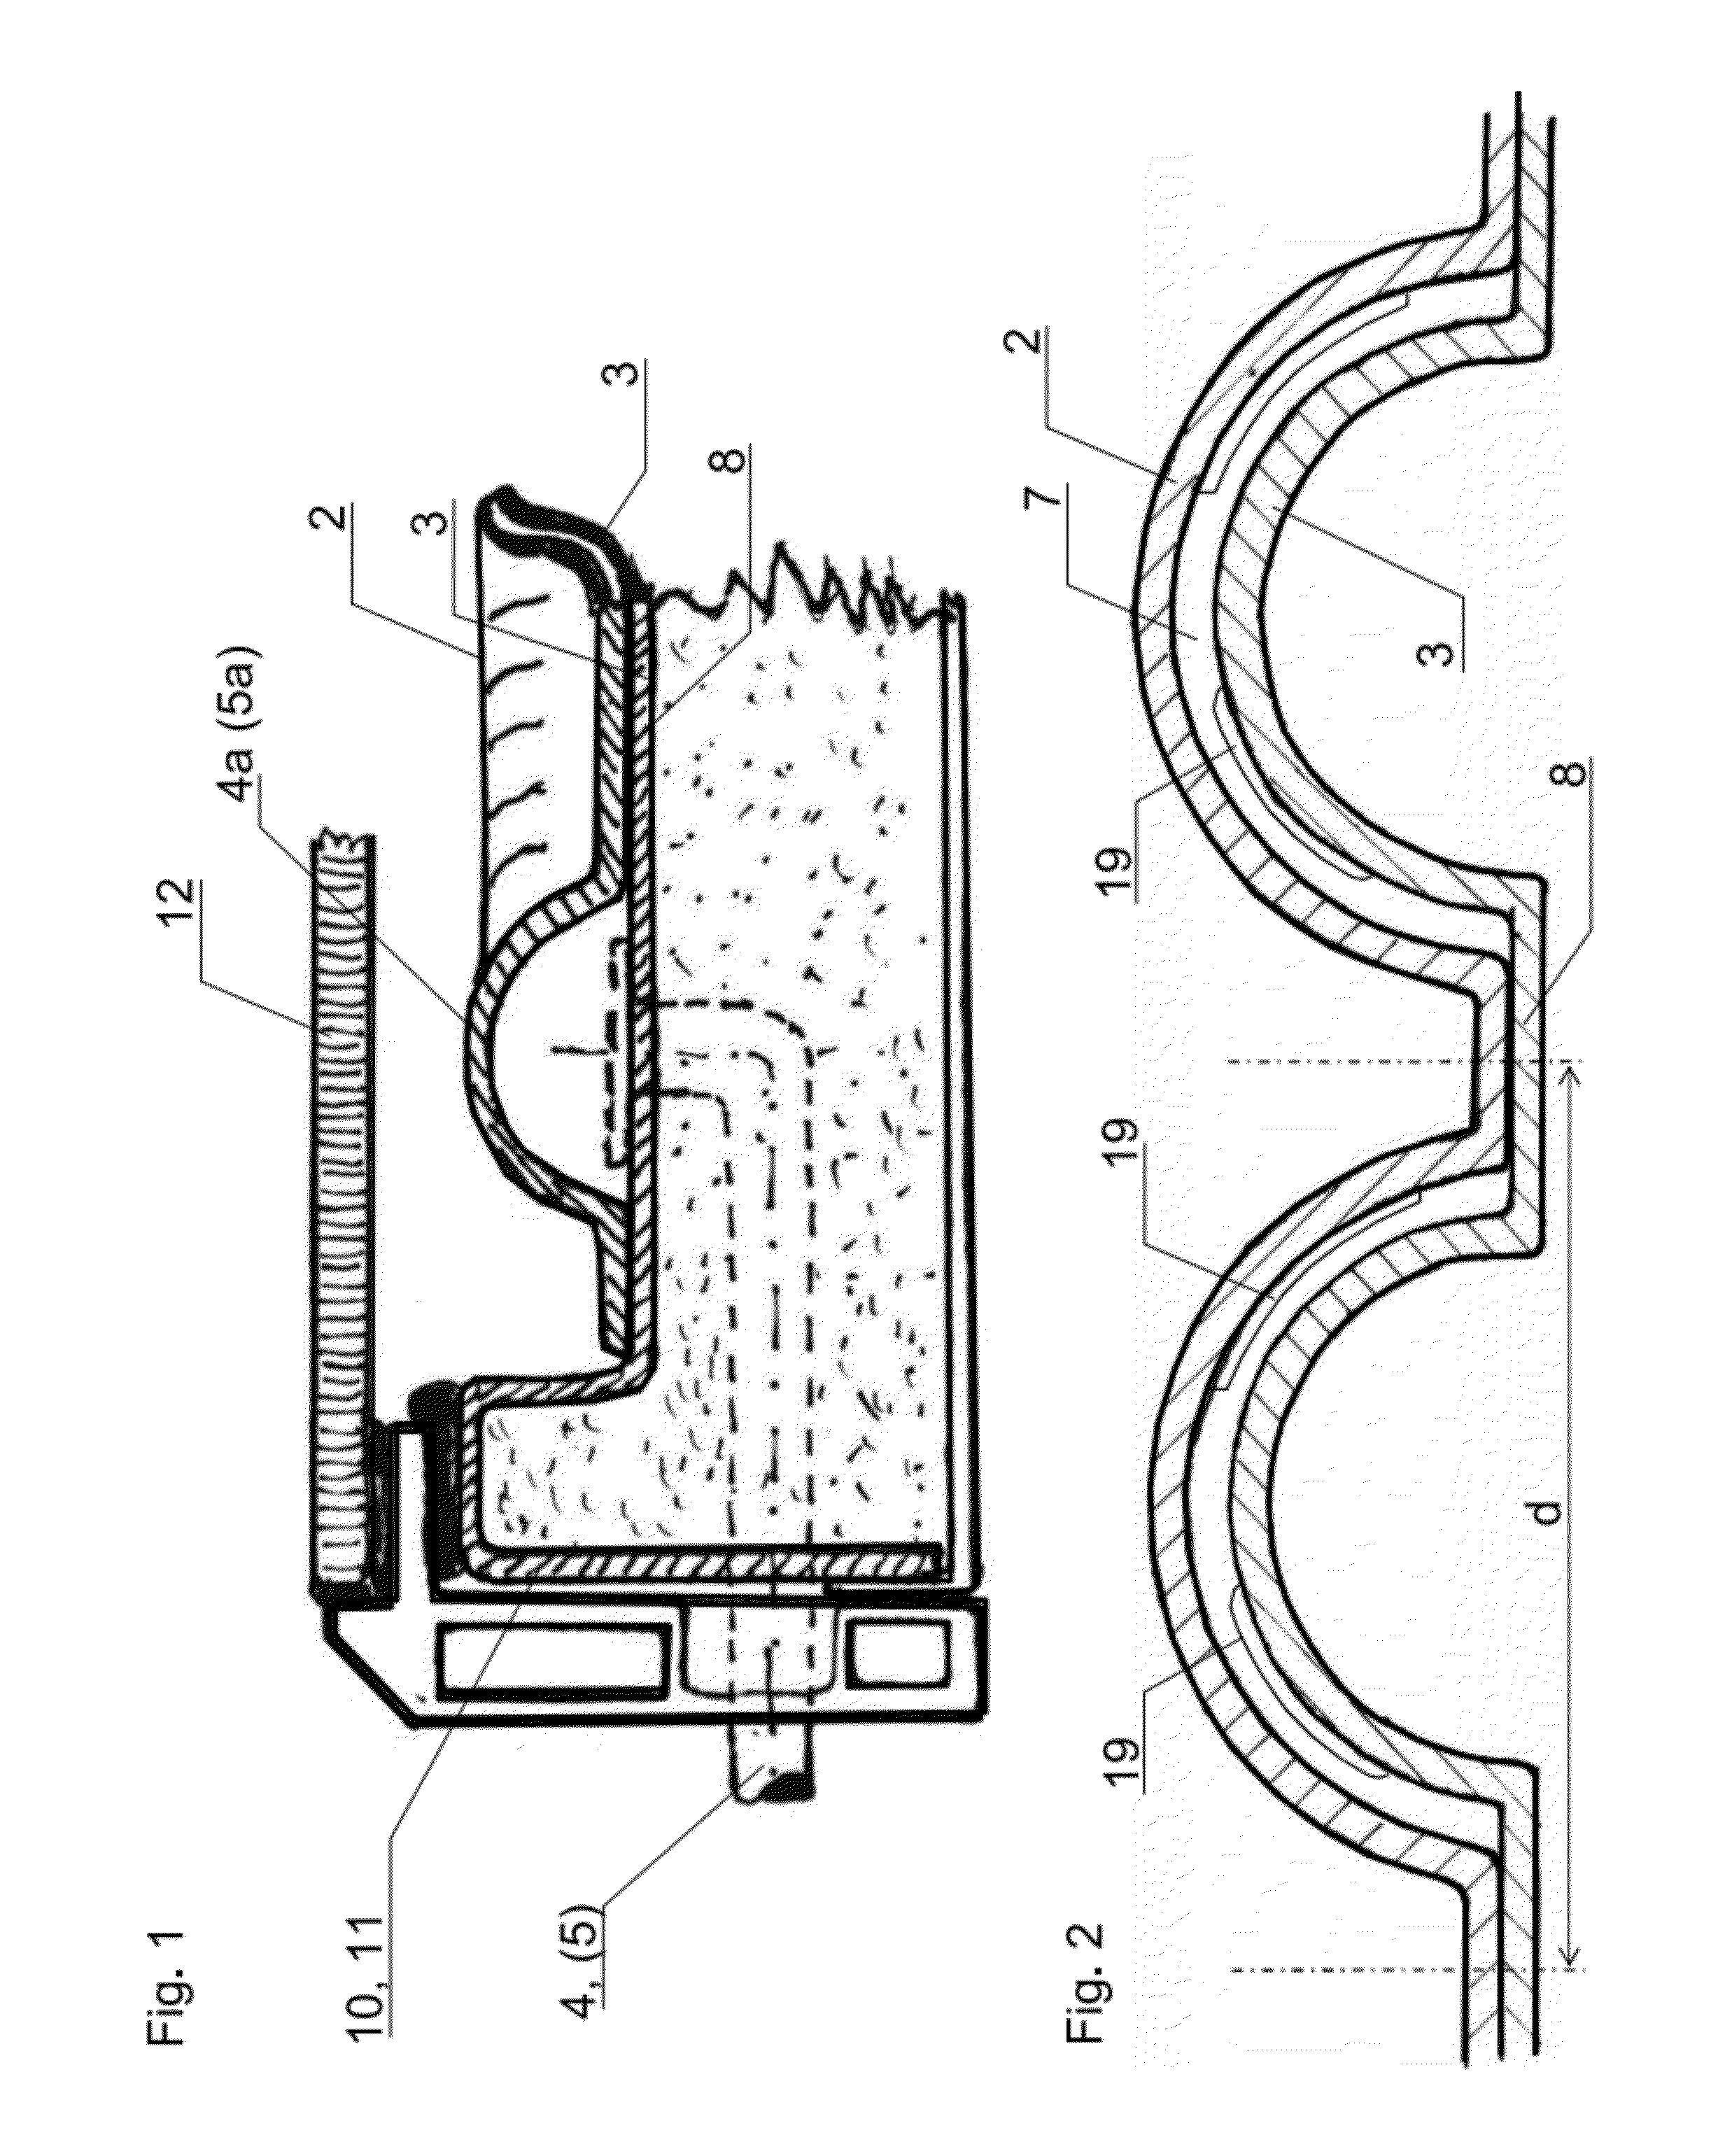 Heat exchanger of the plate type